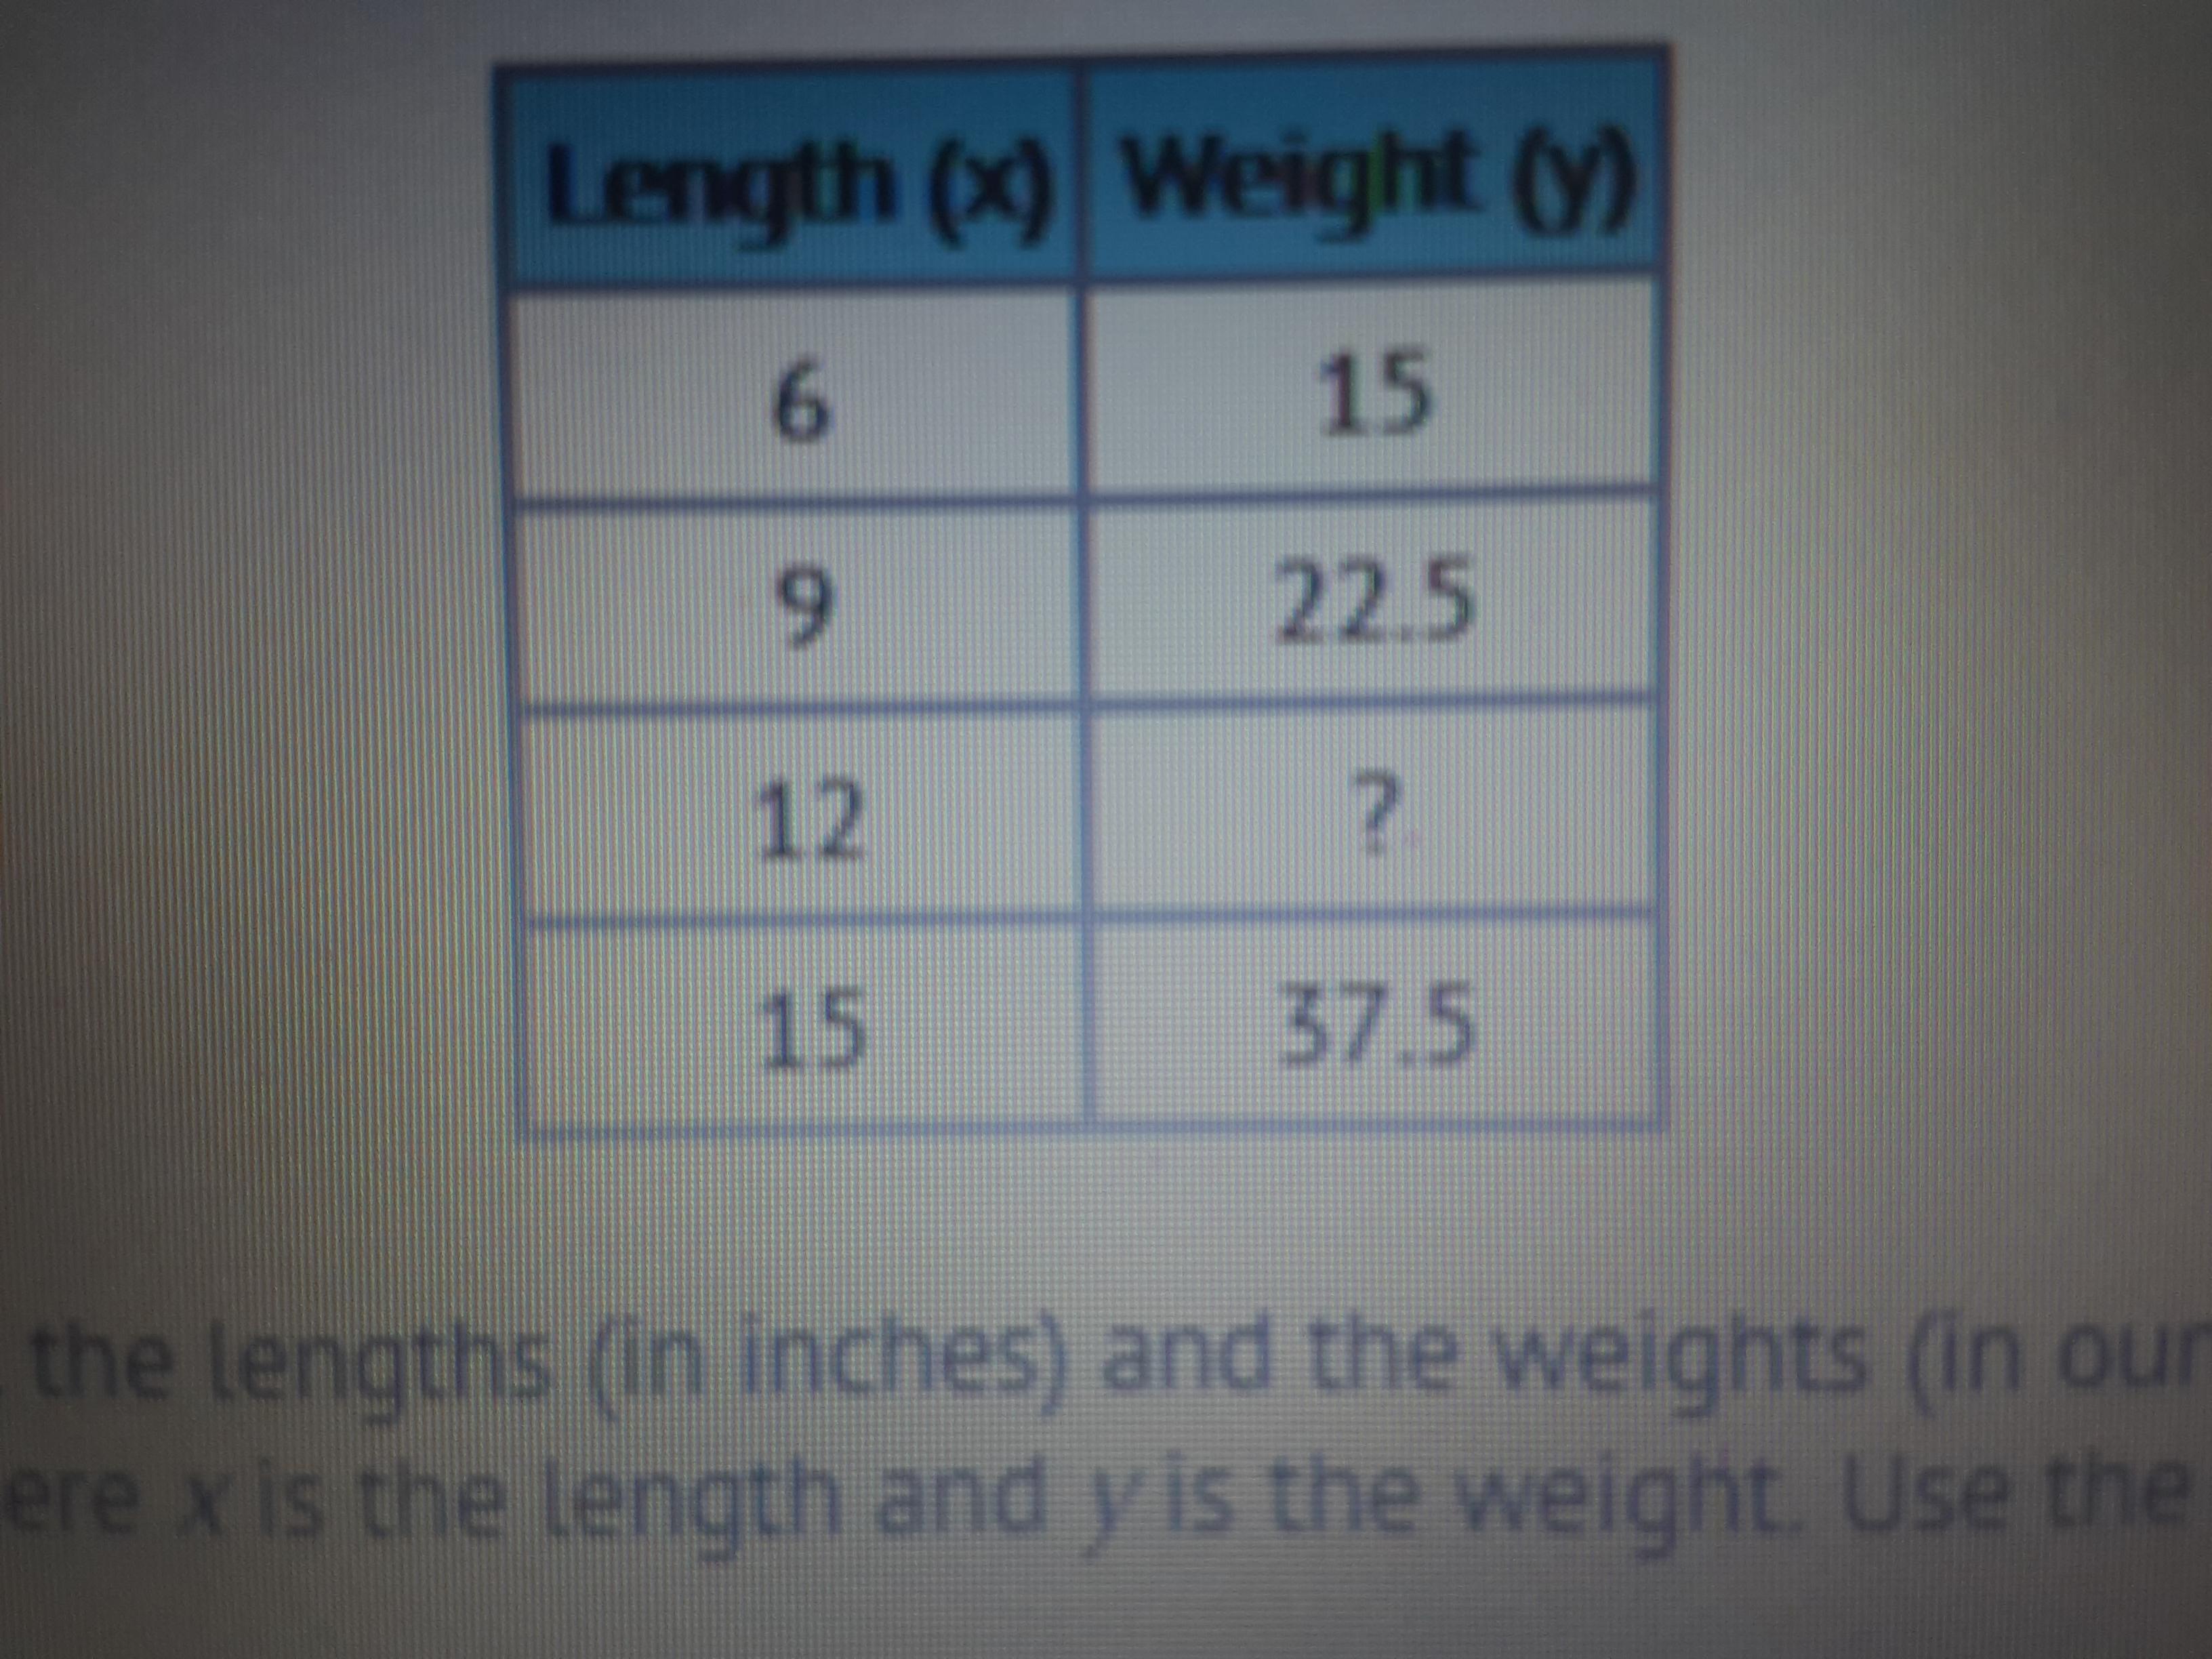 In Her Science Classroom Jane Noticed That The Lengths (in Inches) And The Weights (in Ounces) Of The